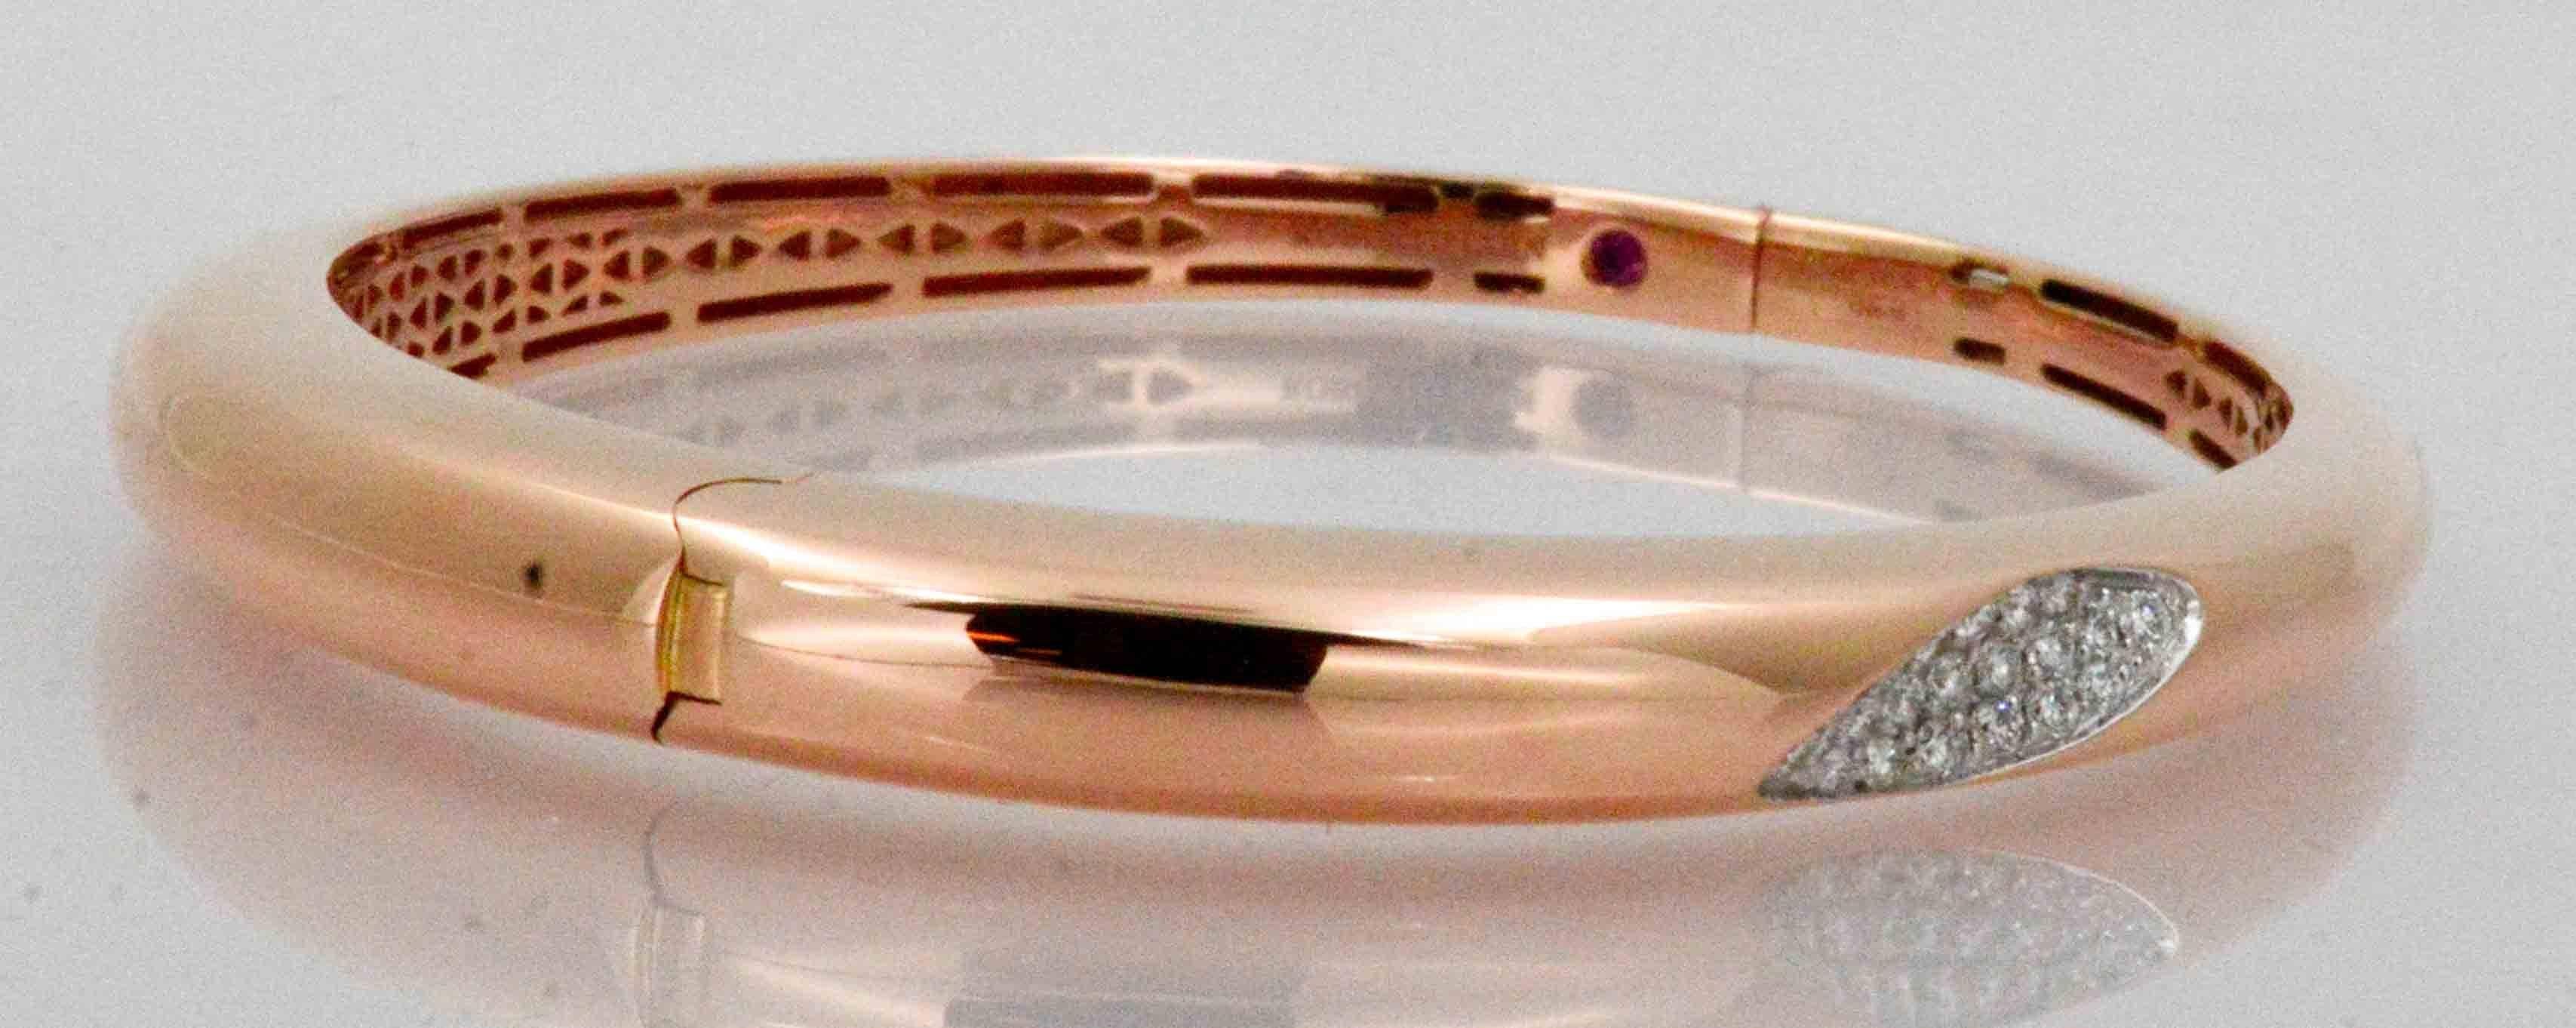 Starring an Italian Roberto Coin rose gold hinged bangle bracelet, this gorgeous bracelet  spotlights .30 ctw diamonds (G color, VS internal clarity) in a pave set accent. This alluring rose gold bracelet is tapered in a sleek design, and hinged for